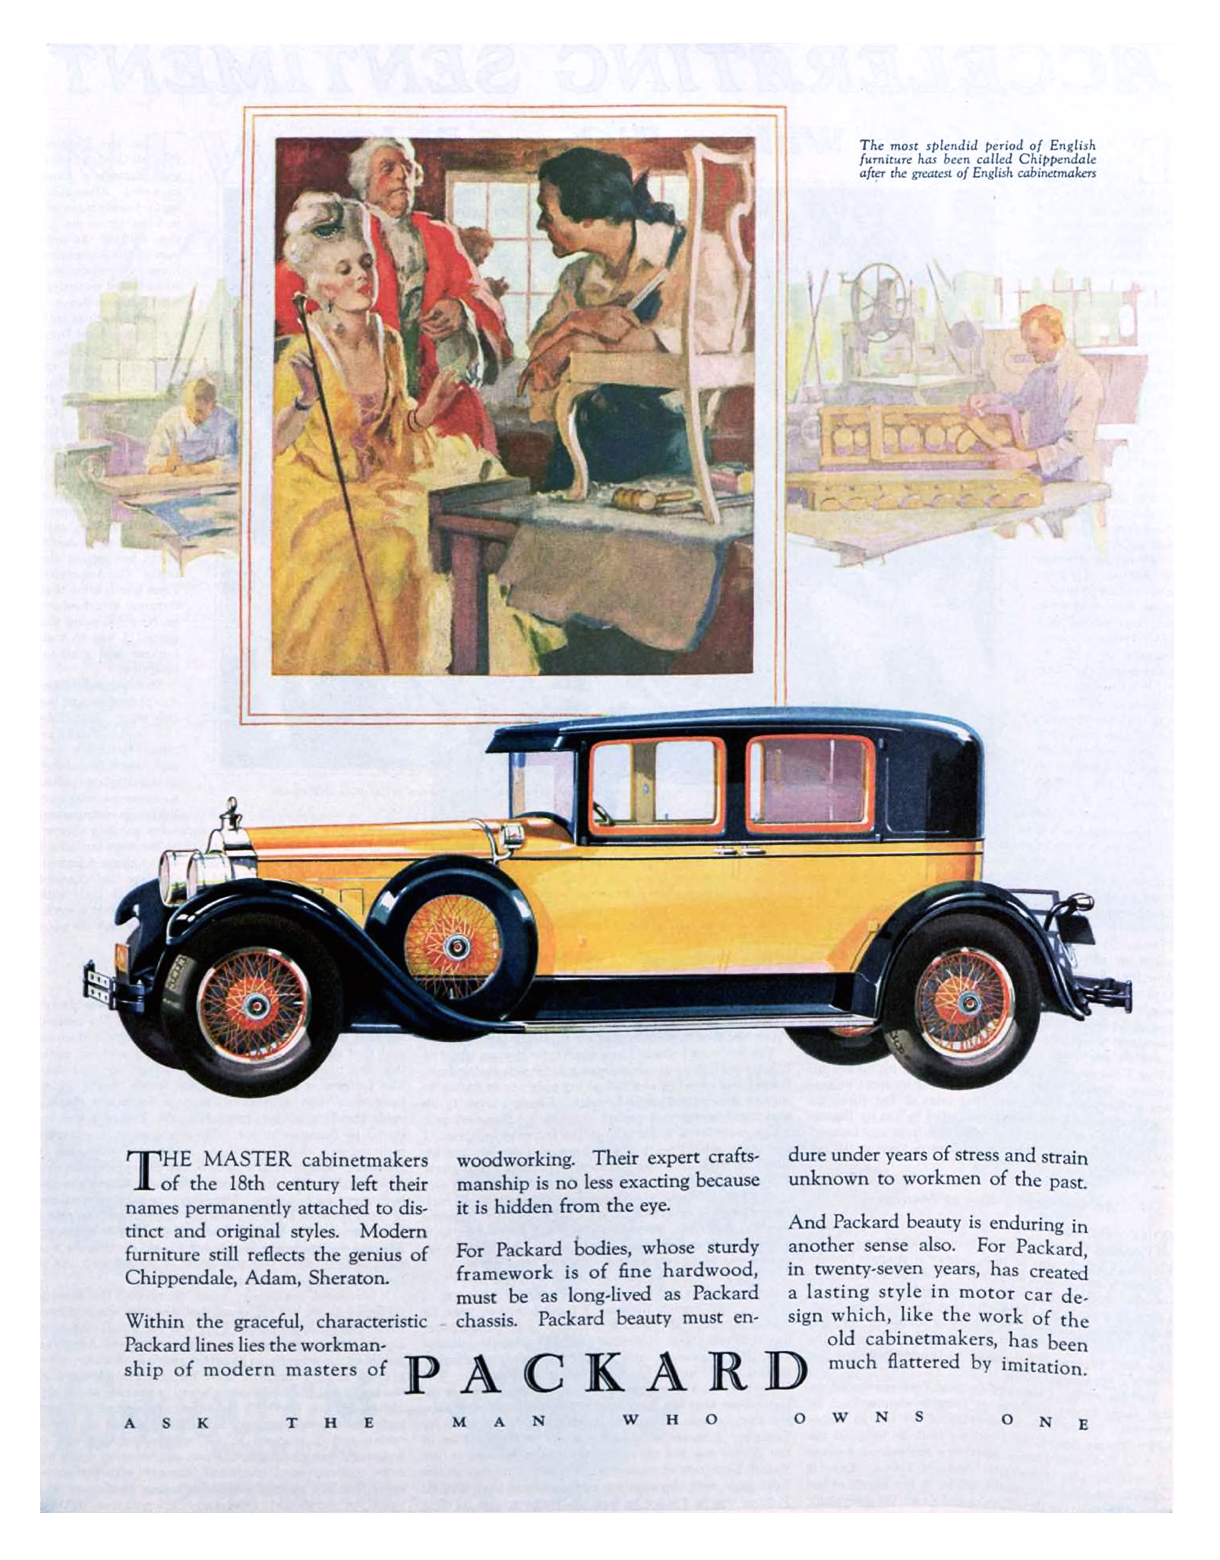 Packard Ad (January, 1928) - The most splendid period of English furniture has been called Chippendale after the greatest of English cabinetmakers